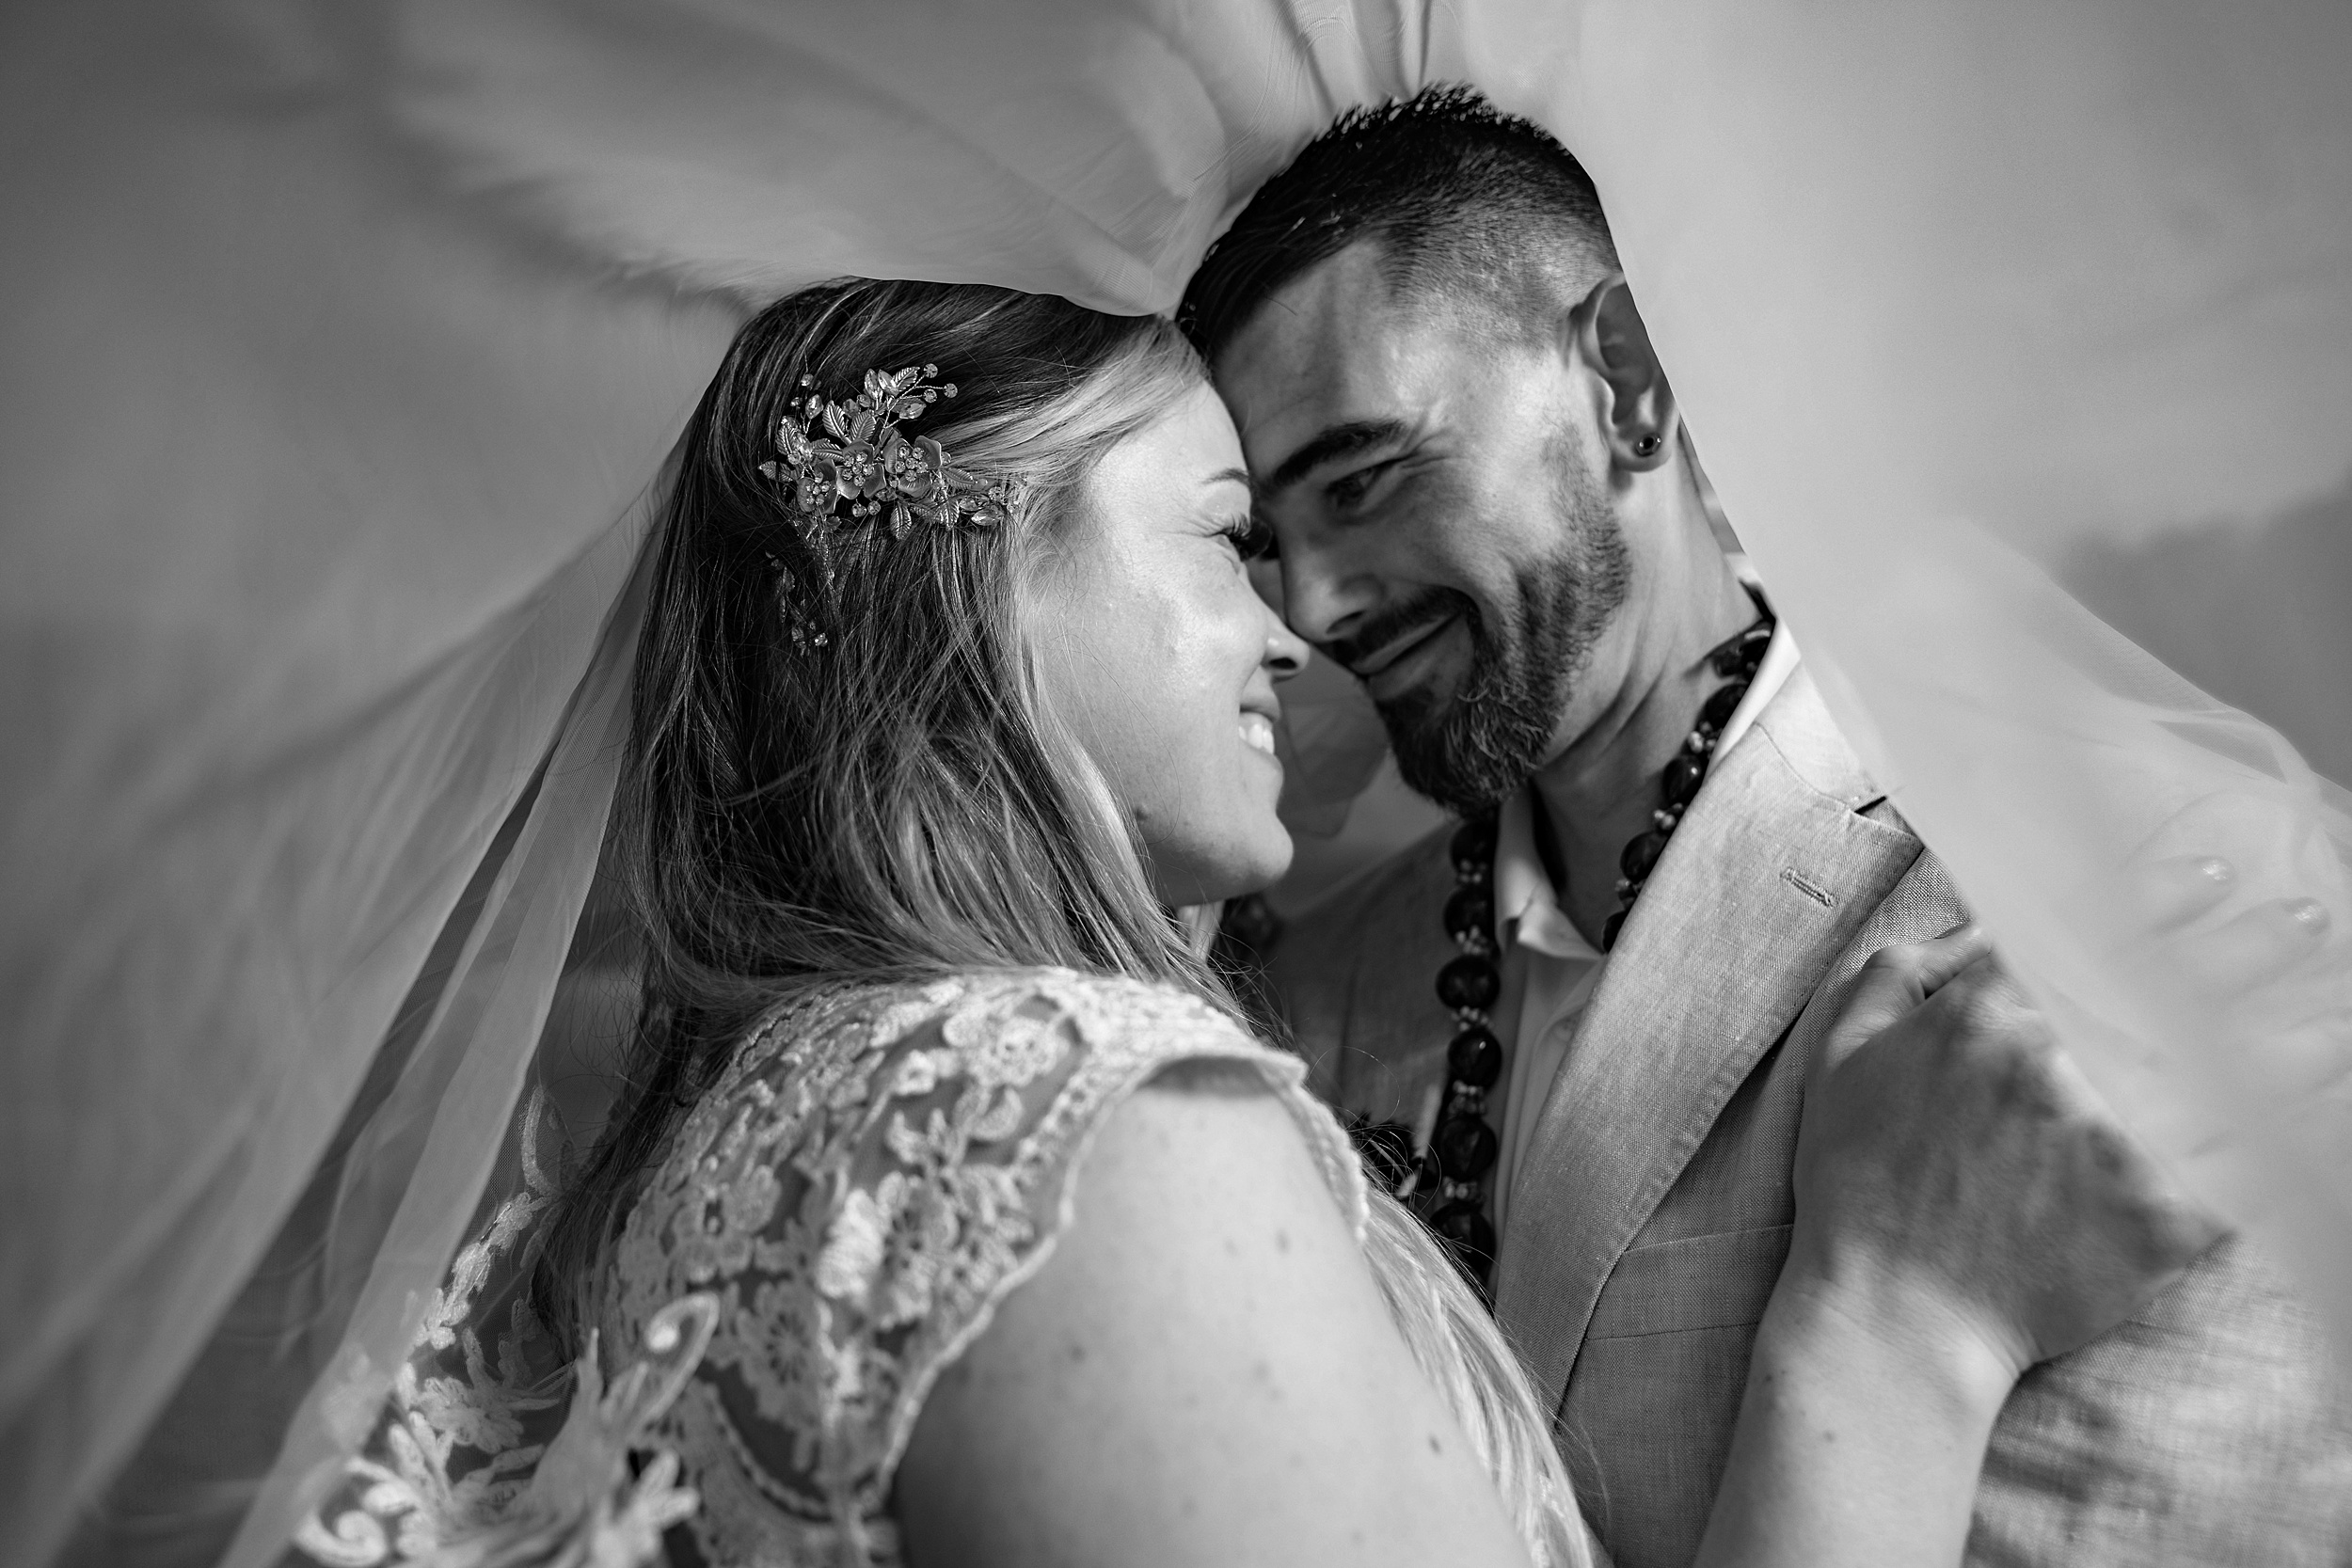 Newlyweds share a smile while standing under a veil in a lace dress at their the garden villa wedding